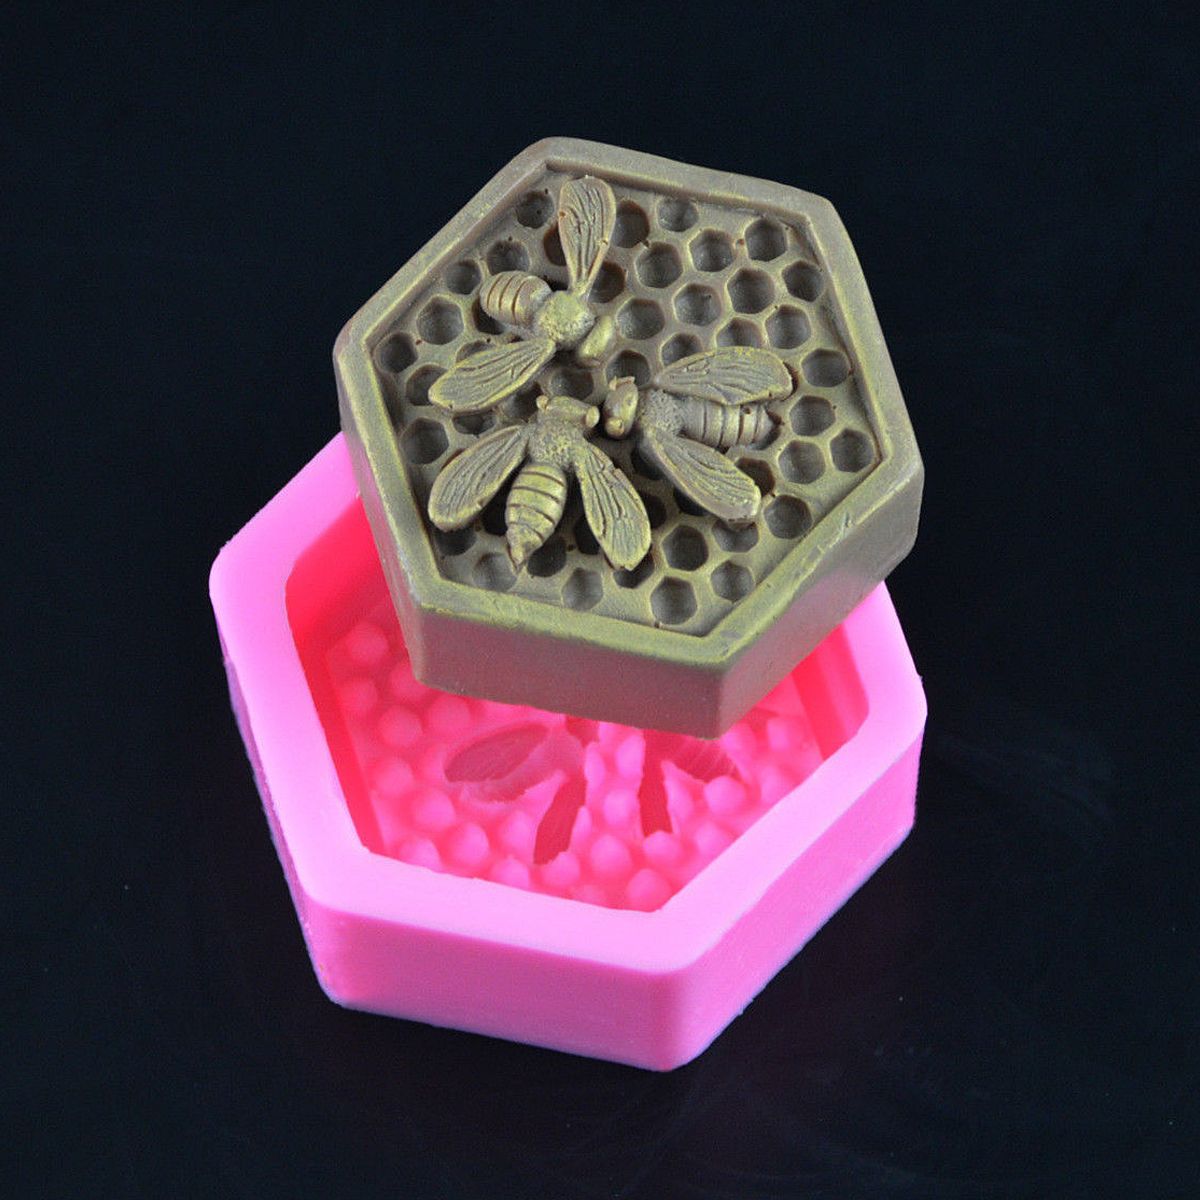 Honeycomb-Bee-Silicone-Mold-Bakeware-Family-DIY-Fondant-Chocolate-Cake-Mould-1552675